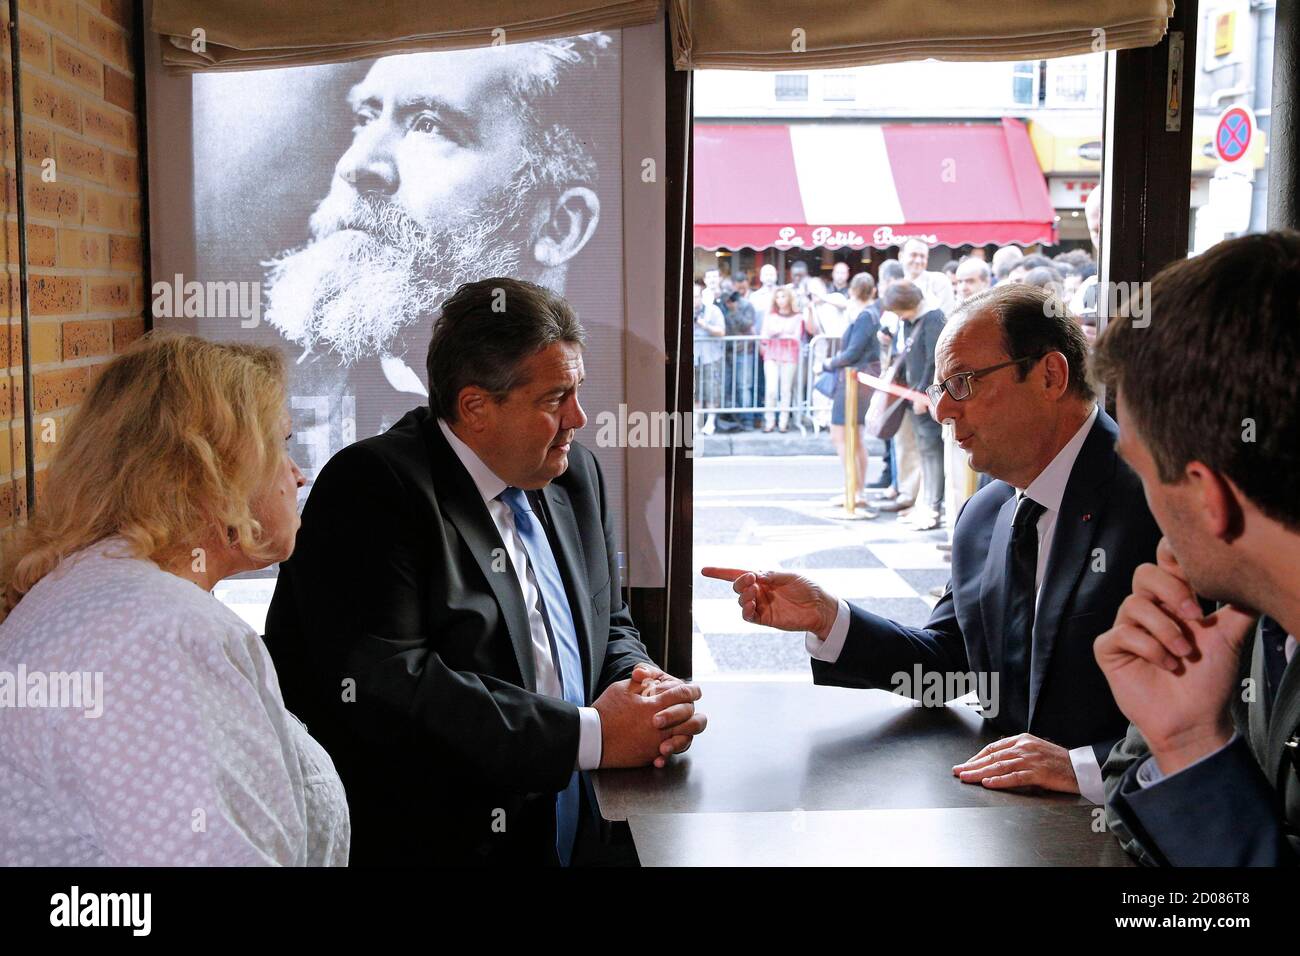 French President Francois Hollande (R) talks with German Minister for Economic Affairs and Energy Sigmar Gabriel inside 'La Taverne du Croissant' Cafe in Paris, July 31, 2014 after a ceremony to commemorate